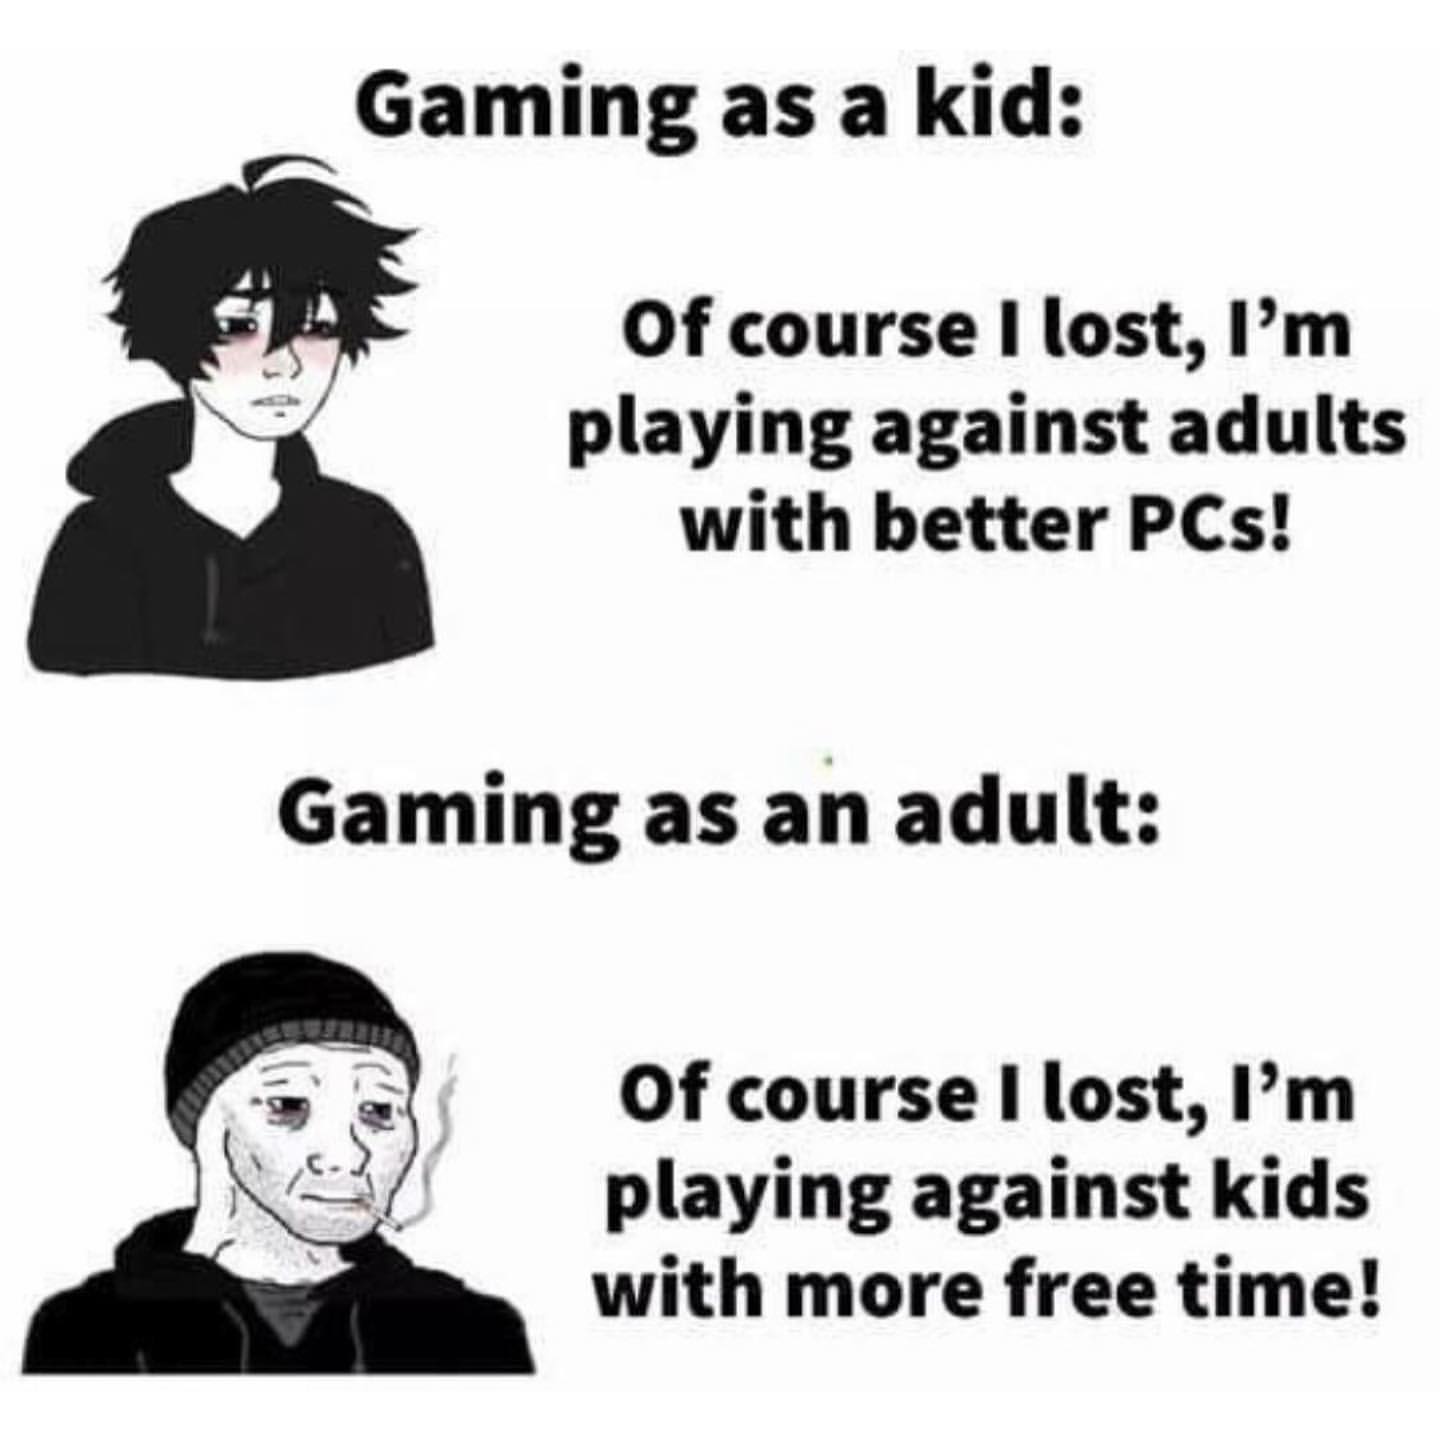 Gaming as a kid: Of course I lost, I'm playing against adults with better PCs! Gaming as an adult: Of course I lost, I'm playing against kids with more free time!